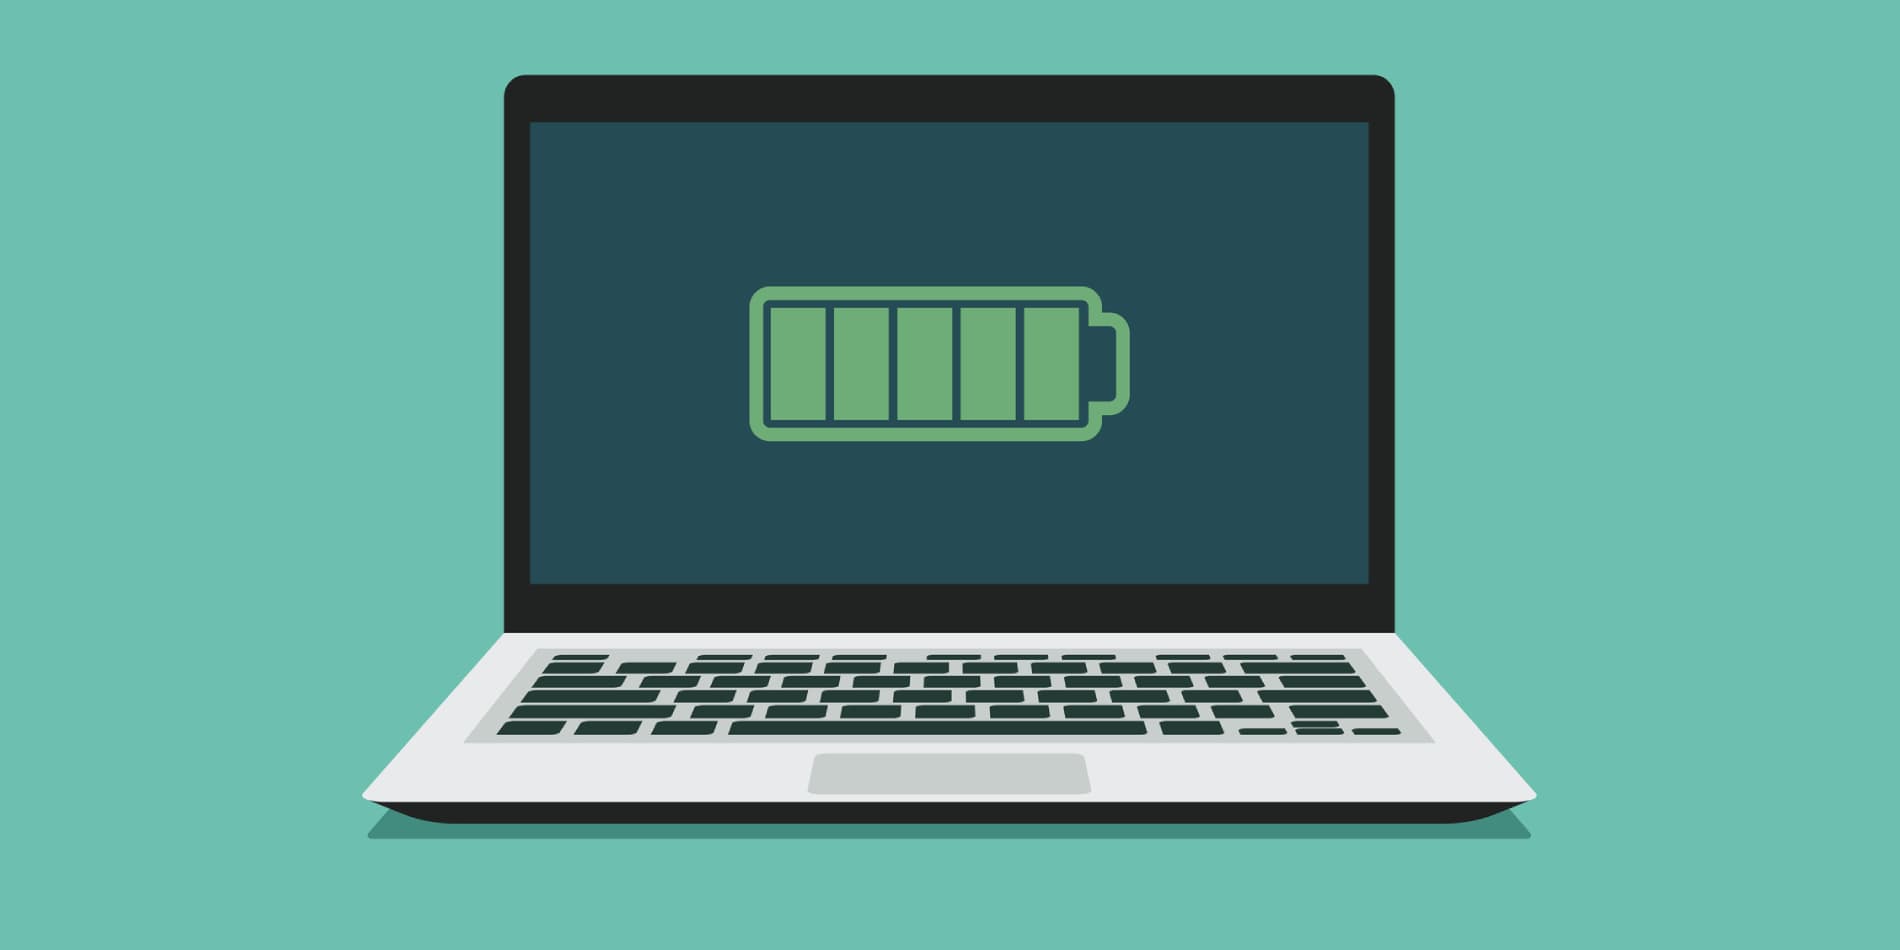 How to Improve Battery Life on Windows Laptops